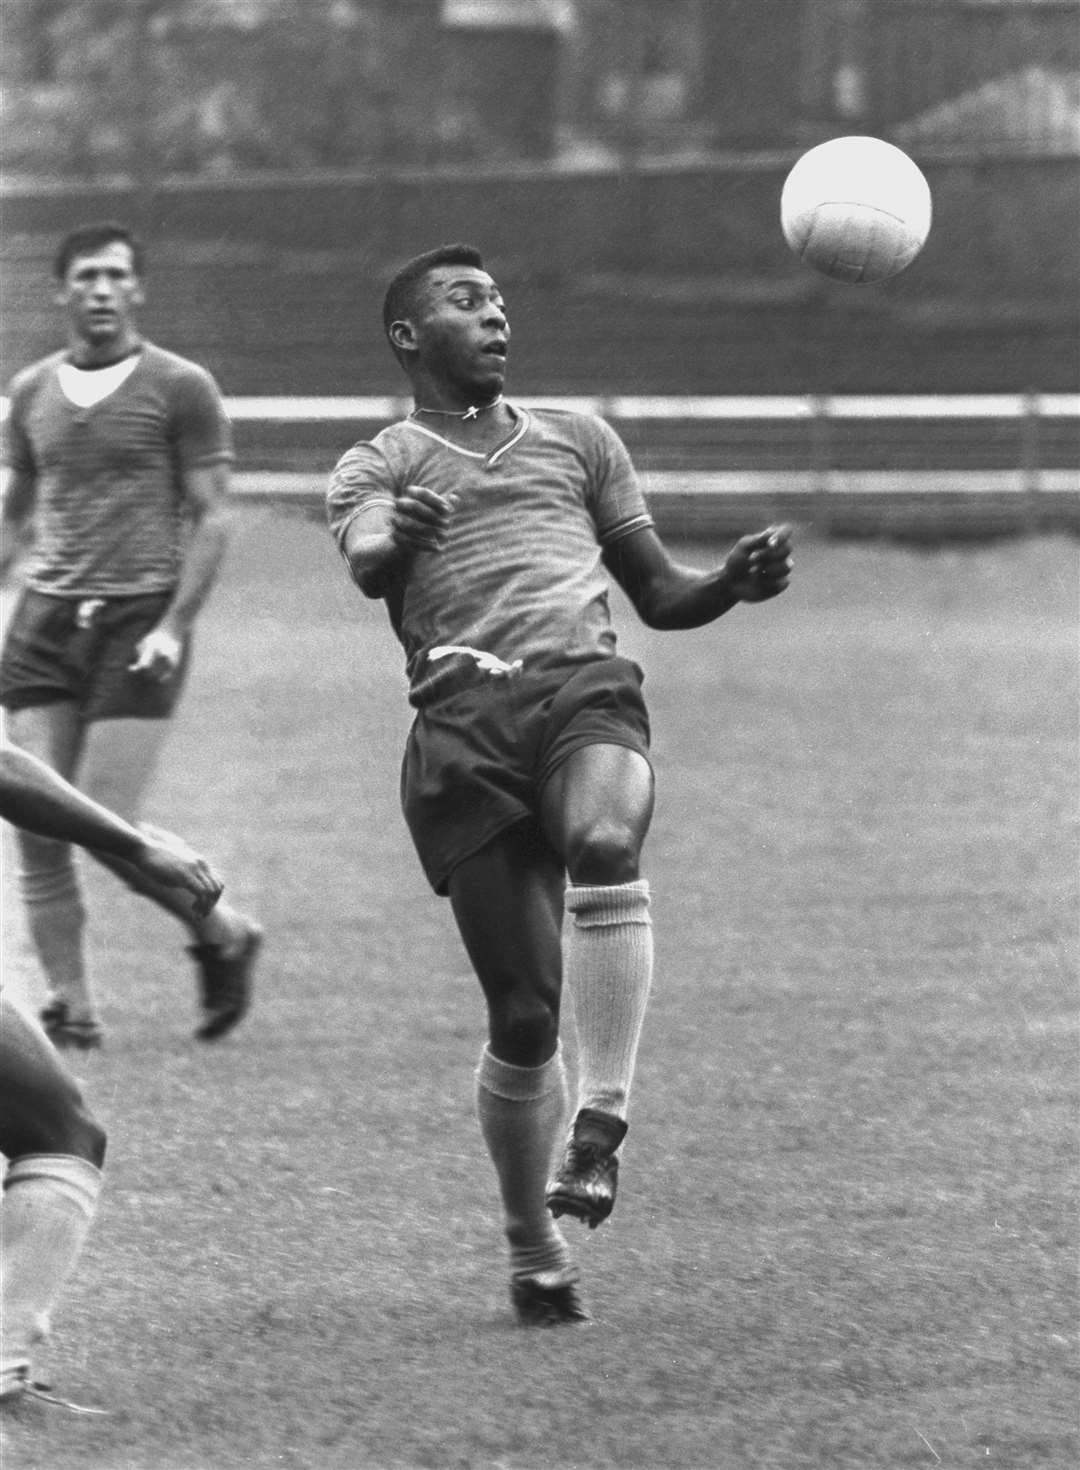 Pele trains at Kilmarnock’s Rugby Park stadium ahead of the World Cup in England in 1966 (PA)